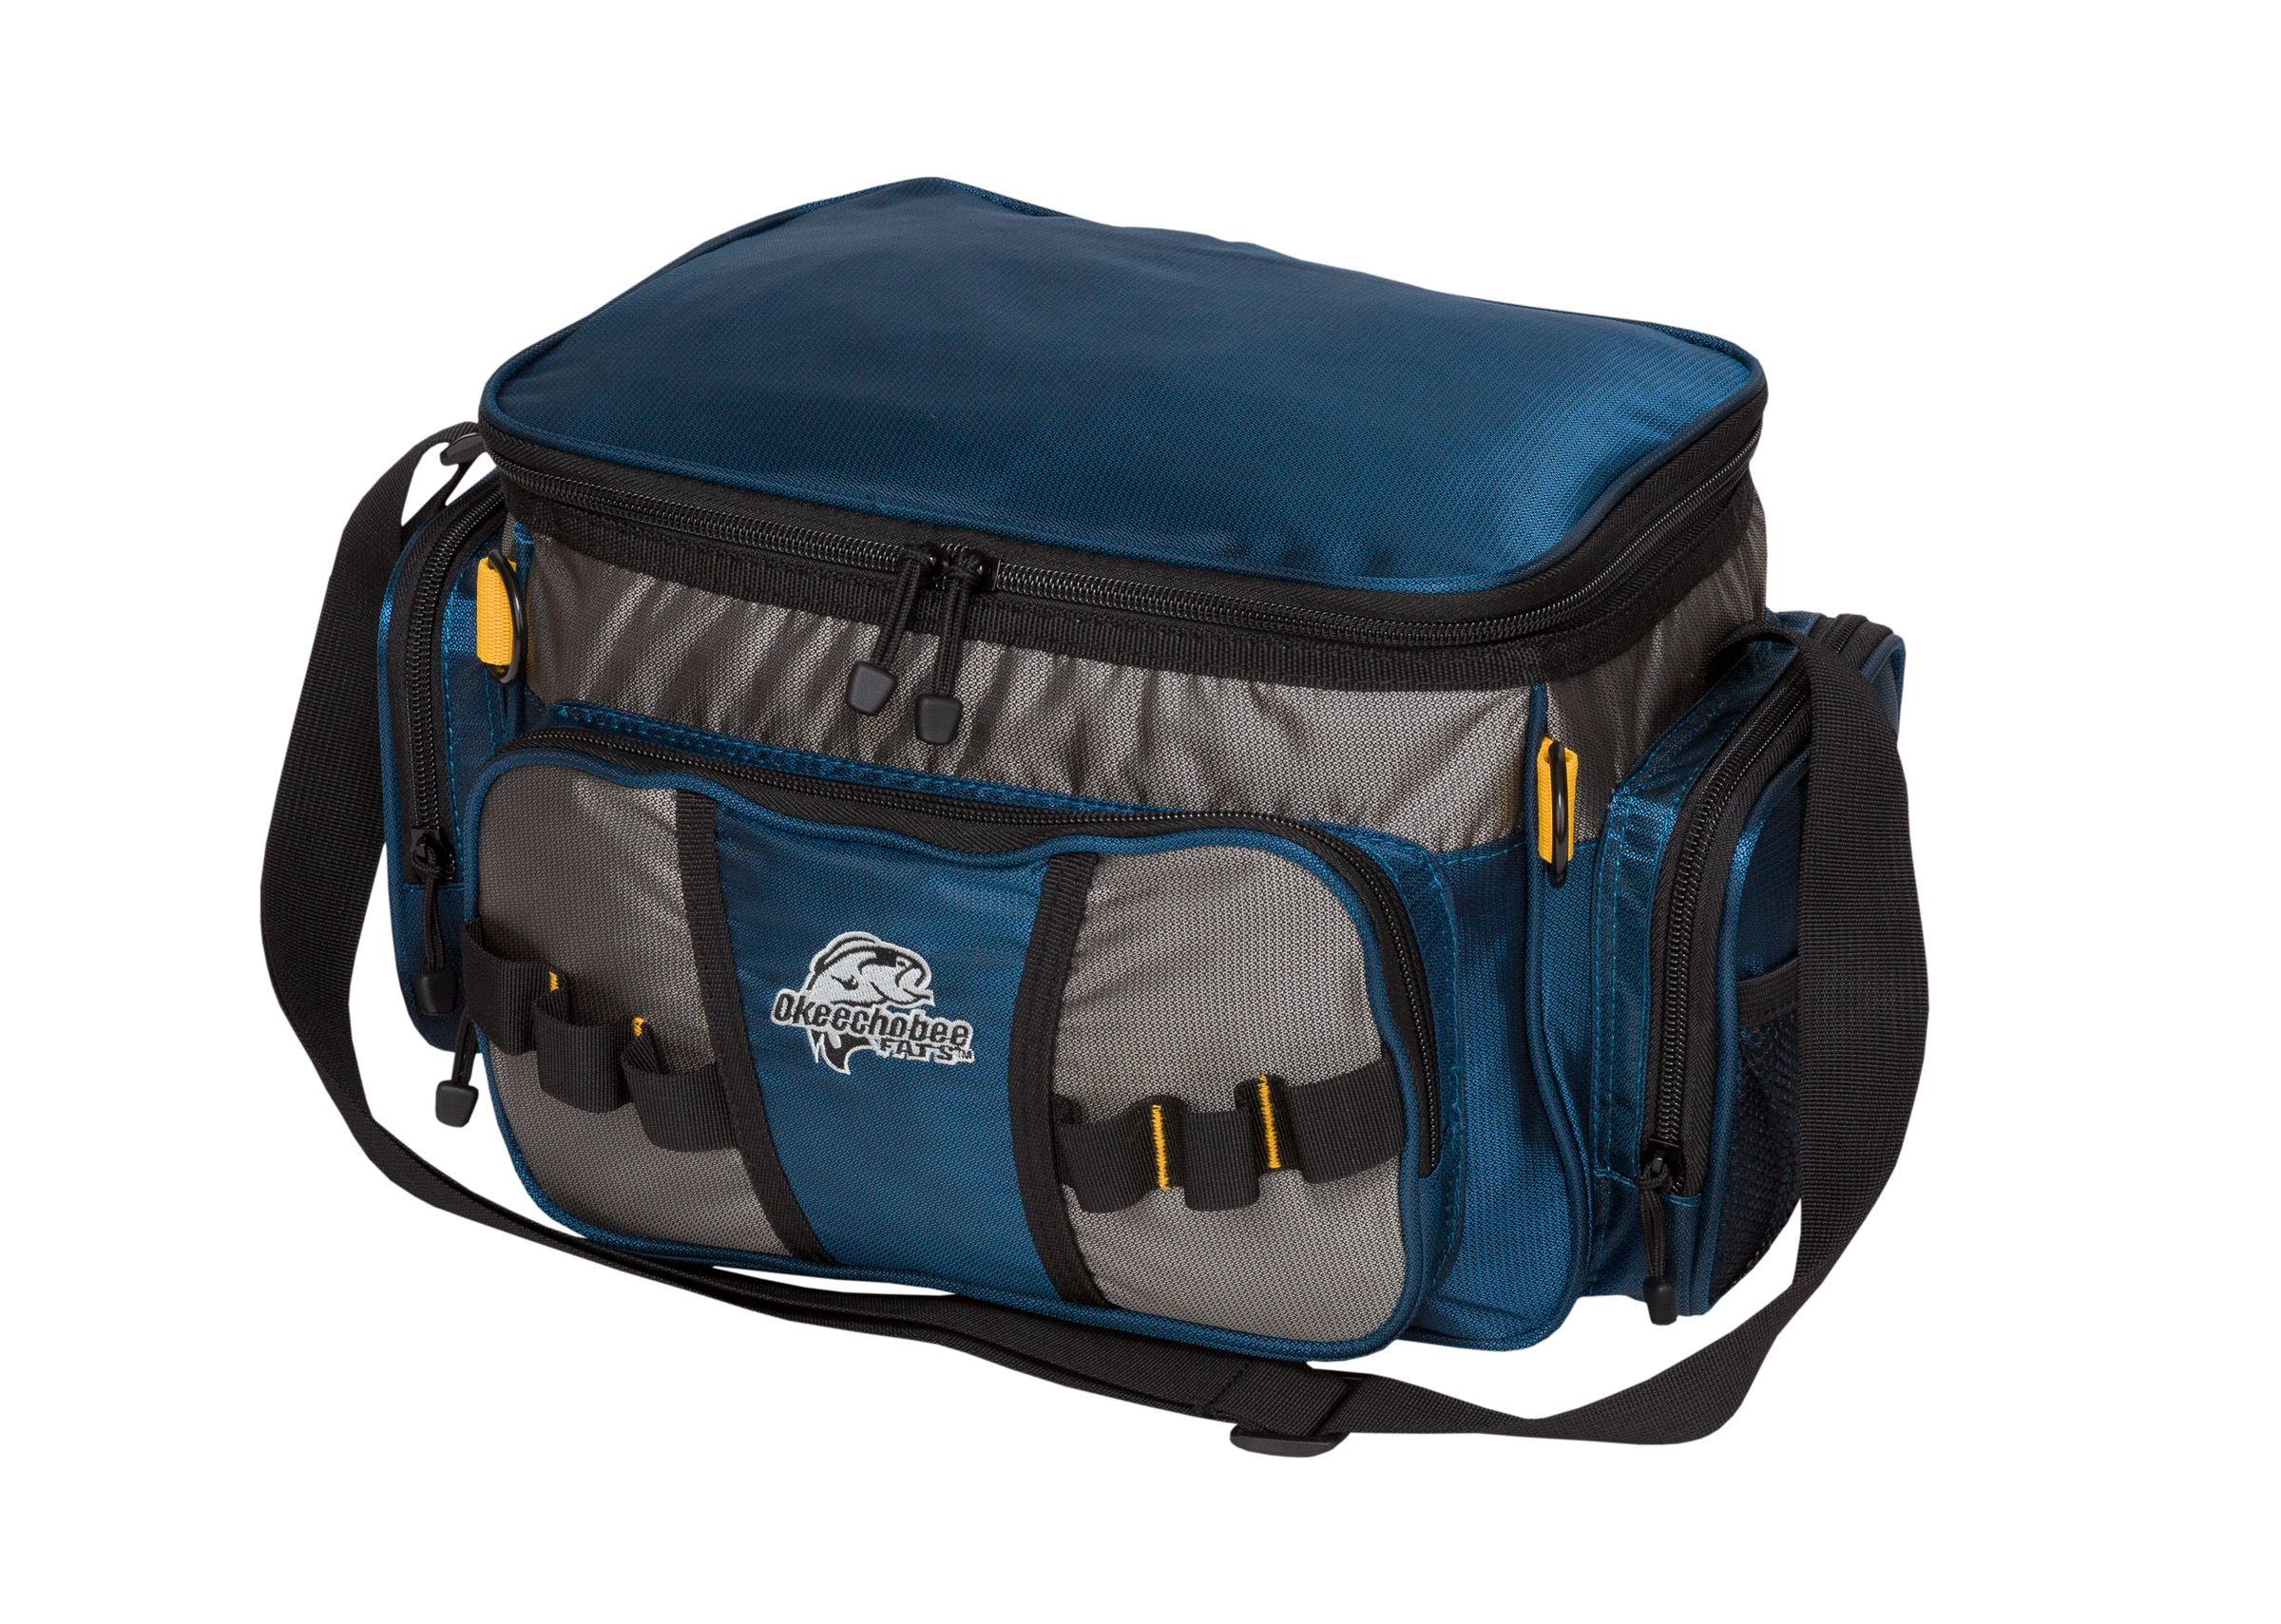 Okeechobee Fats Small Soft-Sided Fishing Tackle Bag with 2 Medium Utility Lure Boxes, Blue Polyester - image 4 of 12